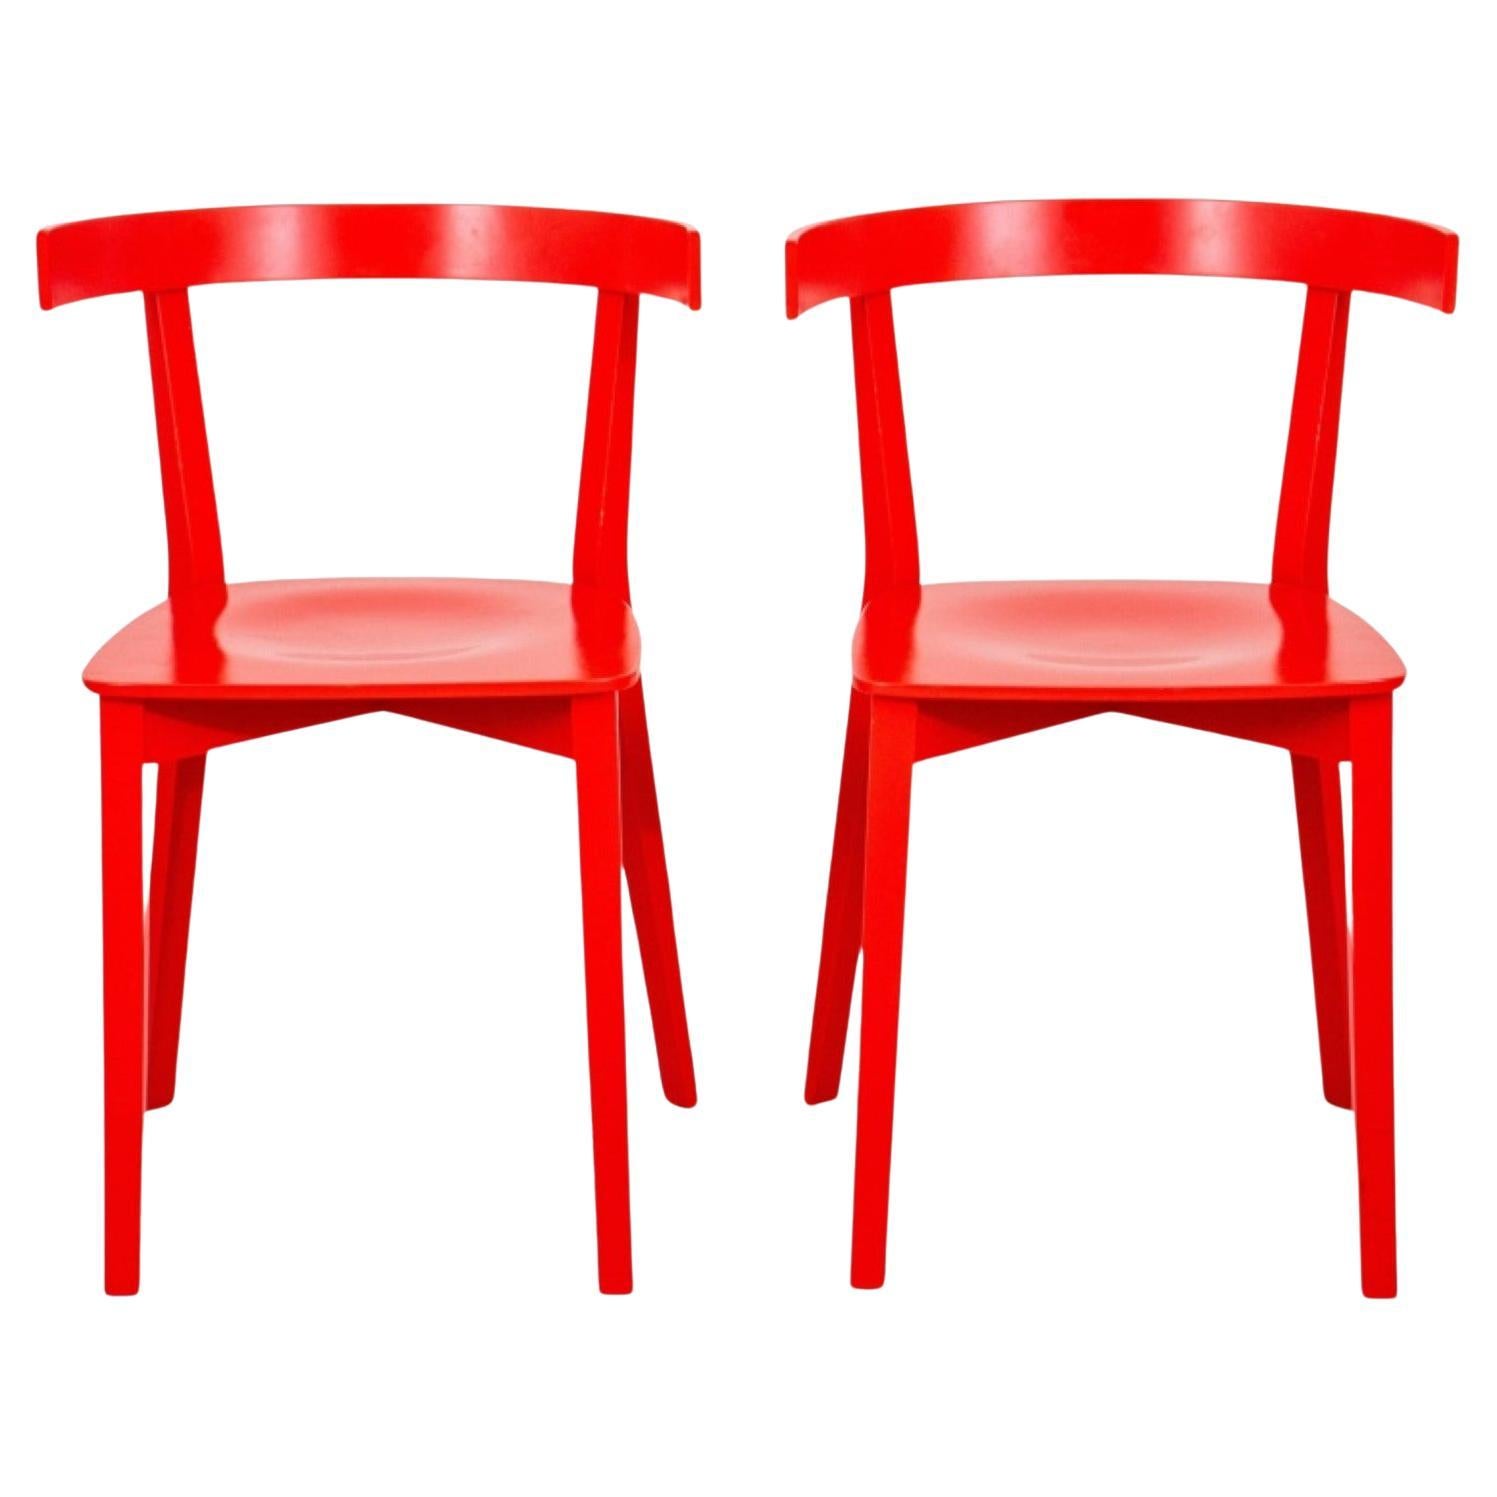 Chaises d'appoint rouges scandinaves modernes, 2